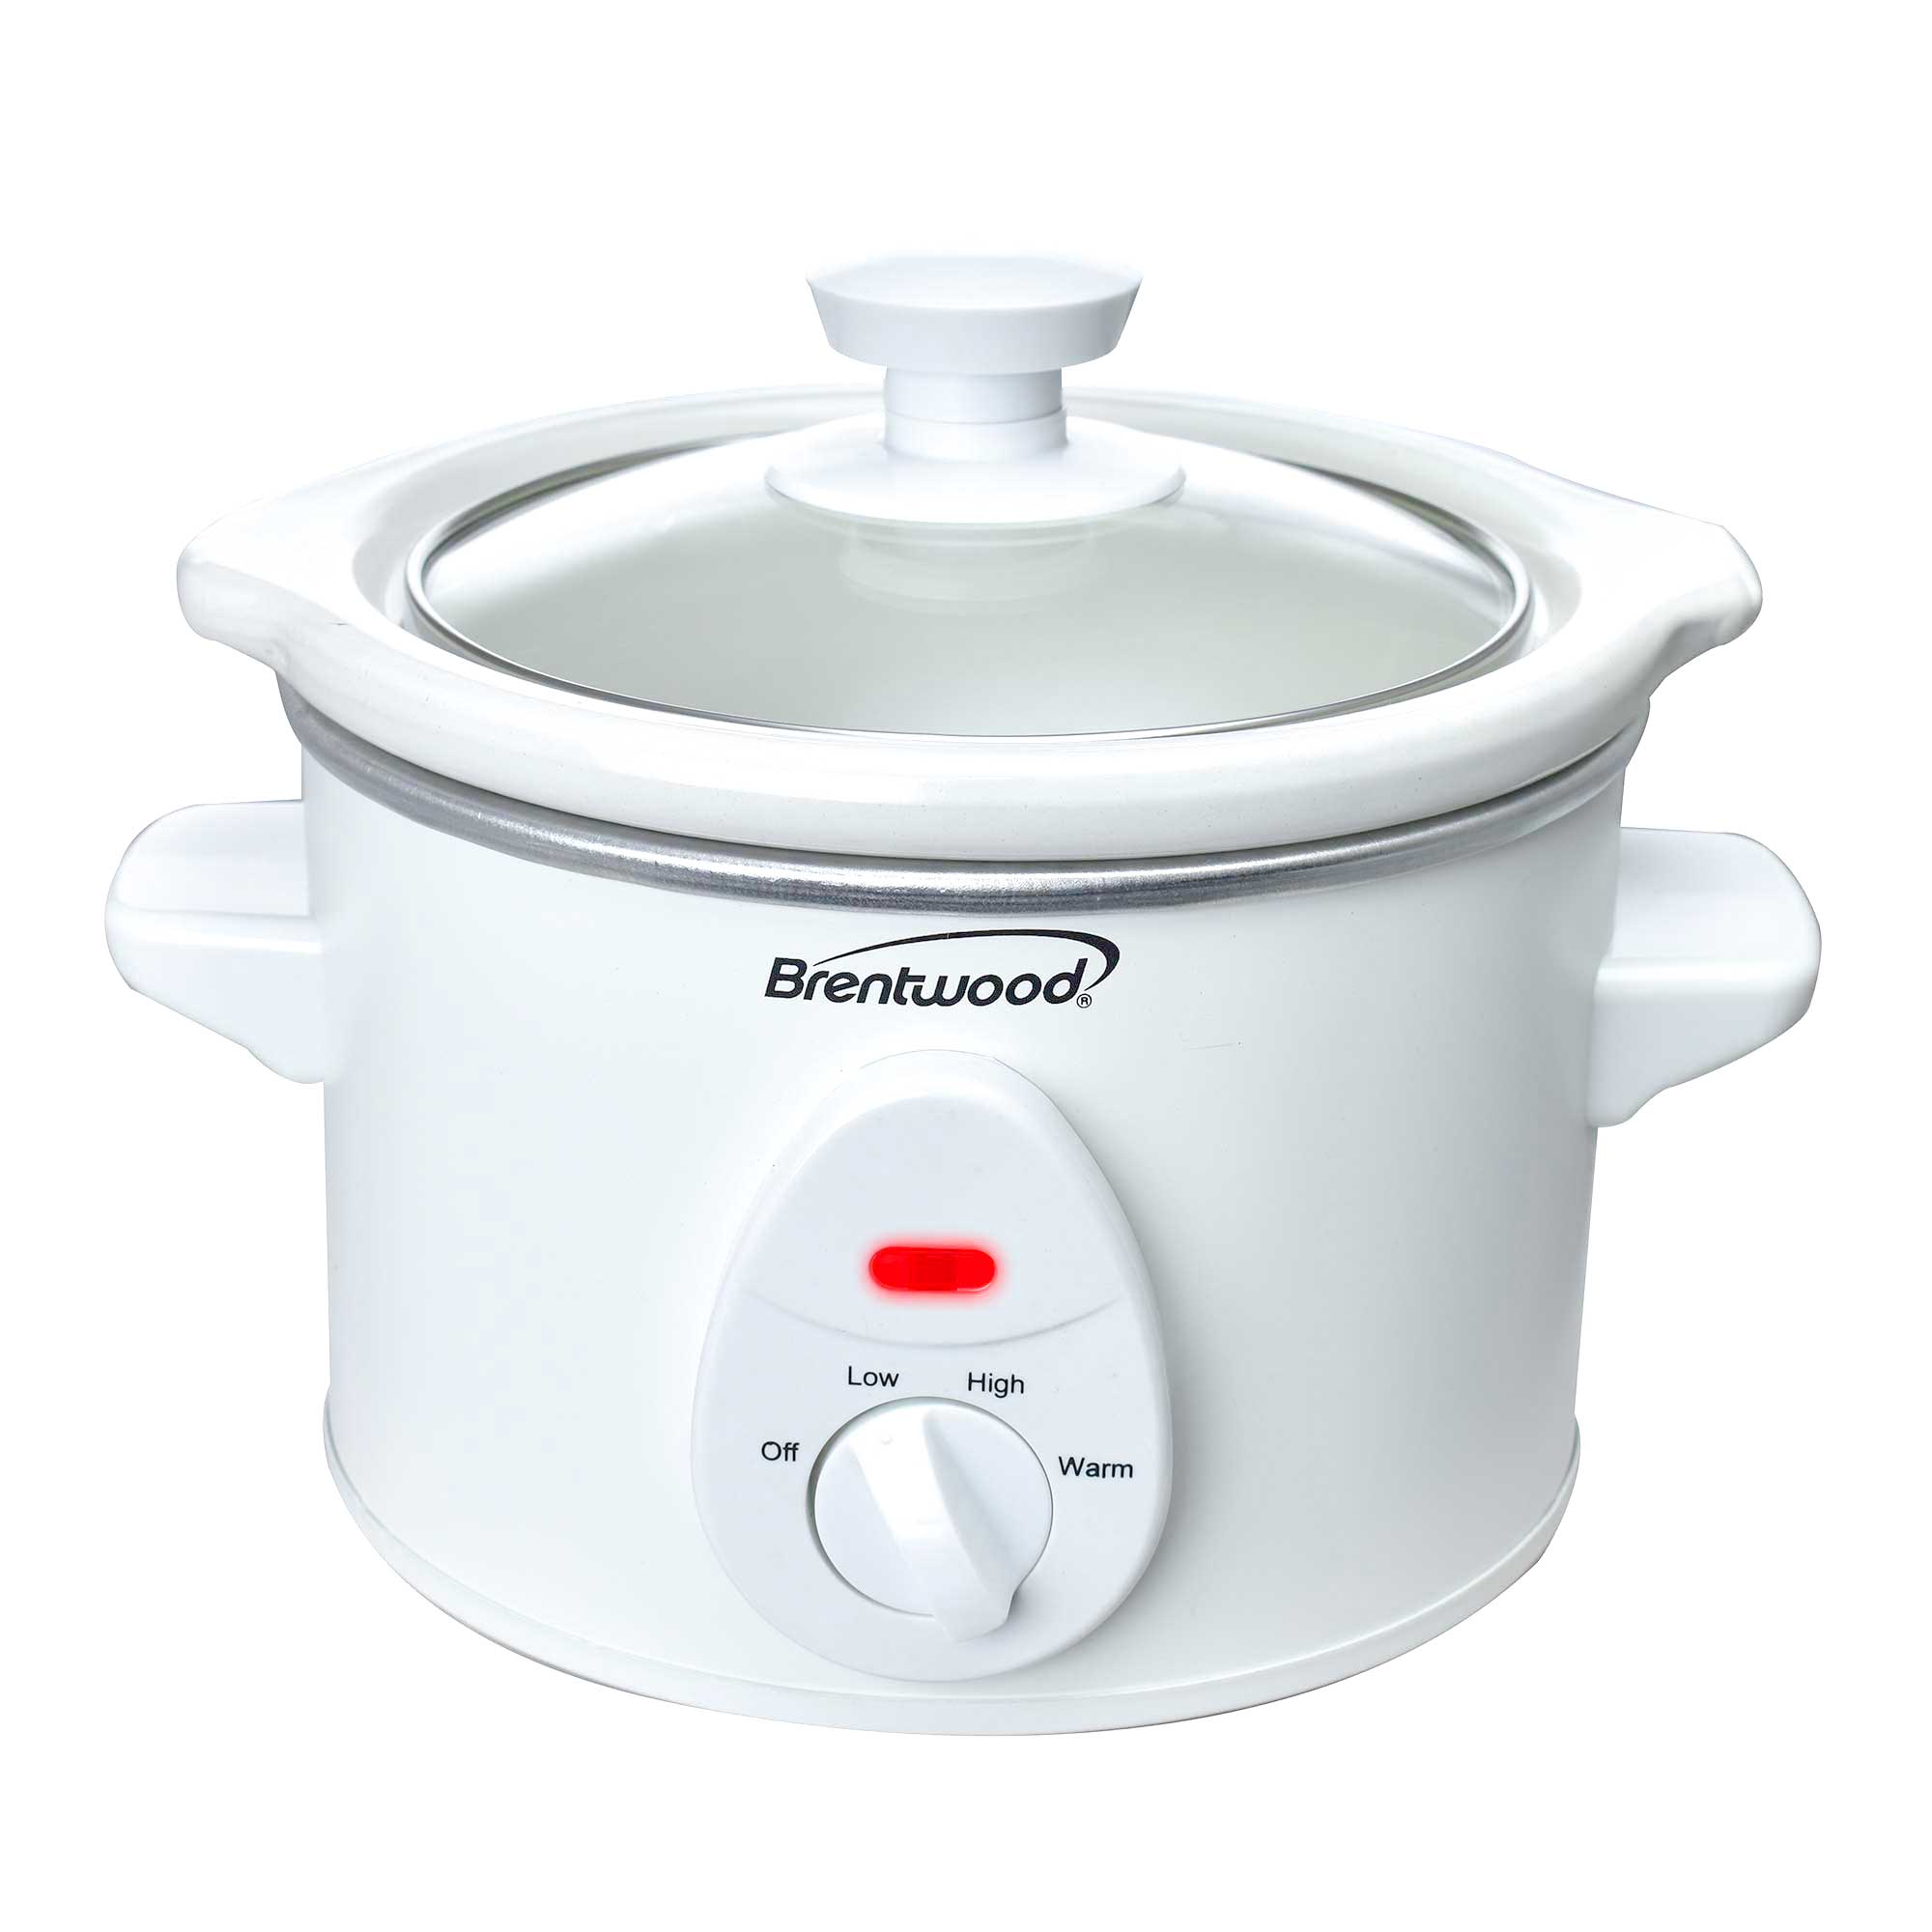 Brentwood SC-130S Slow Cooker Stainless Steel Body, 3-Quart